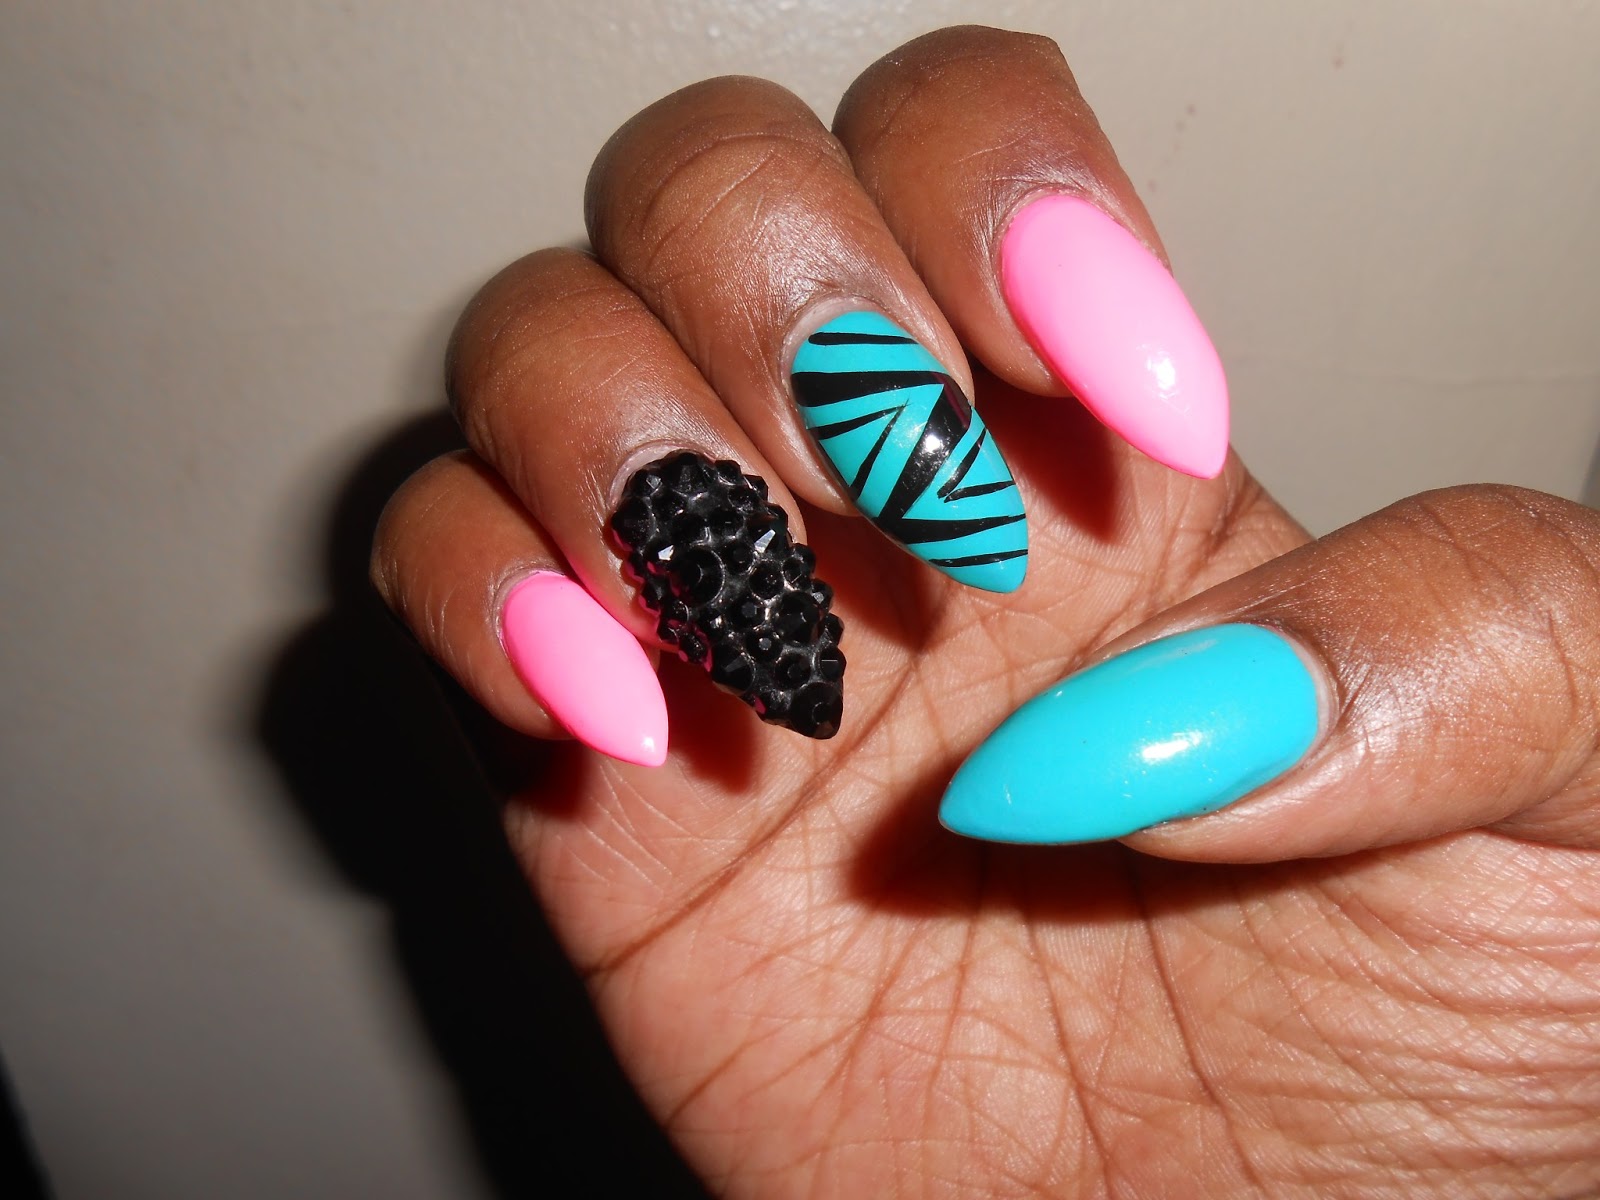 2. Colorful Stiletto Nail Designs for Spring - wide 7